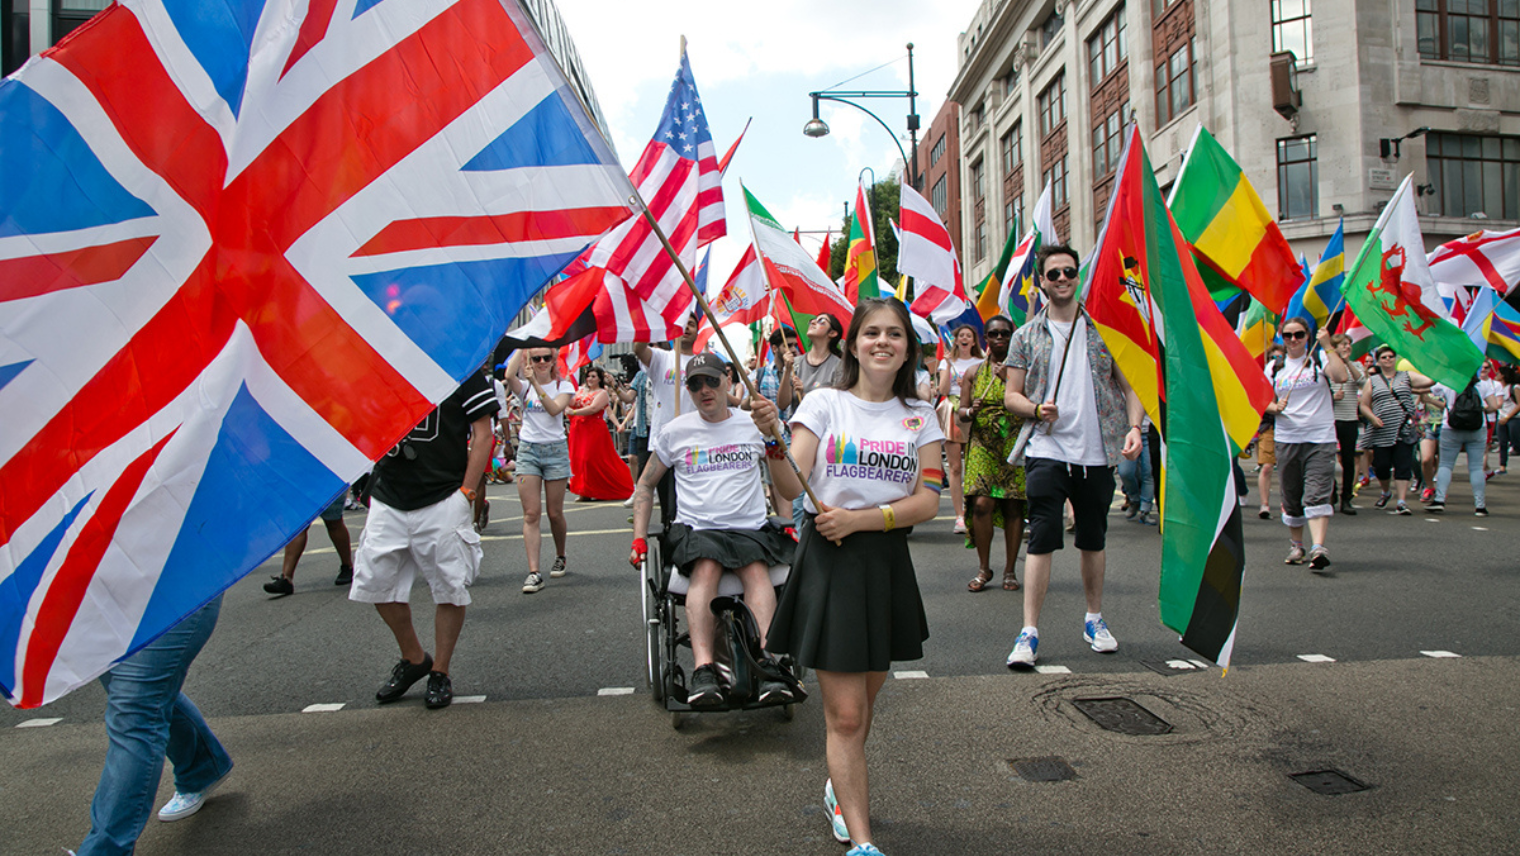 Image of people walking the streets at London Pride waving flags of their home country